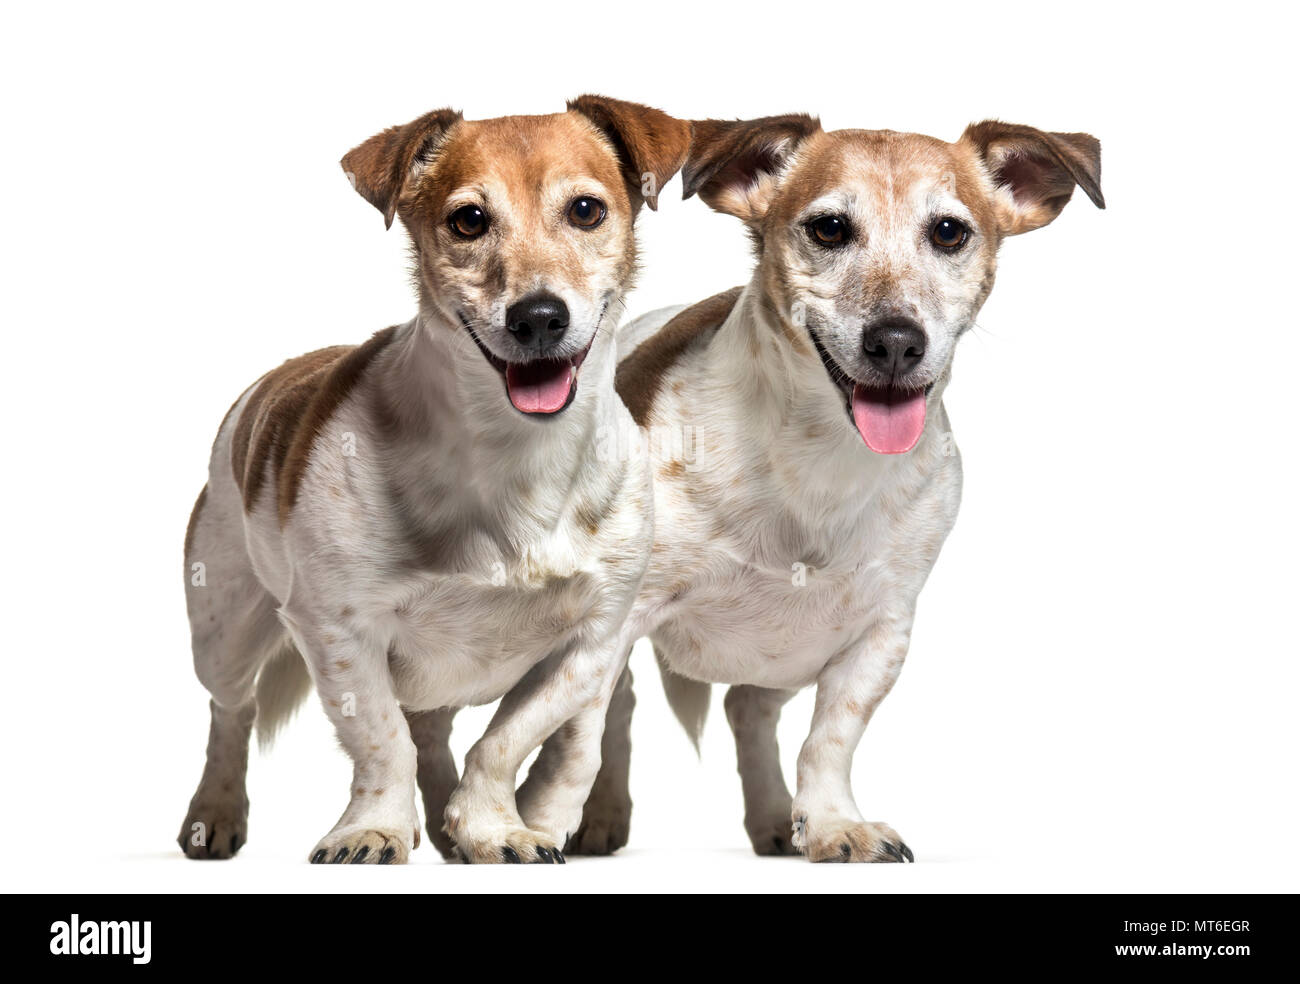 Jack Russell dogs , 8 years old, together standing against white background Stock Photo